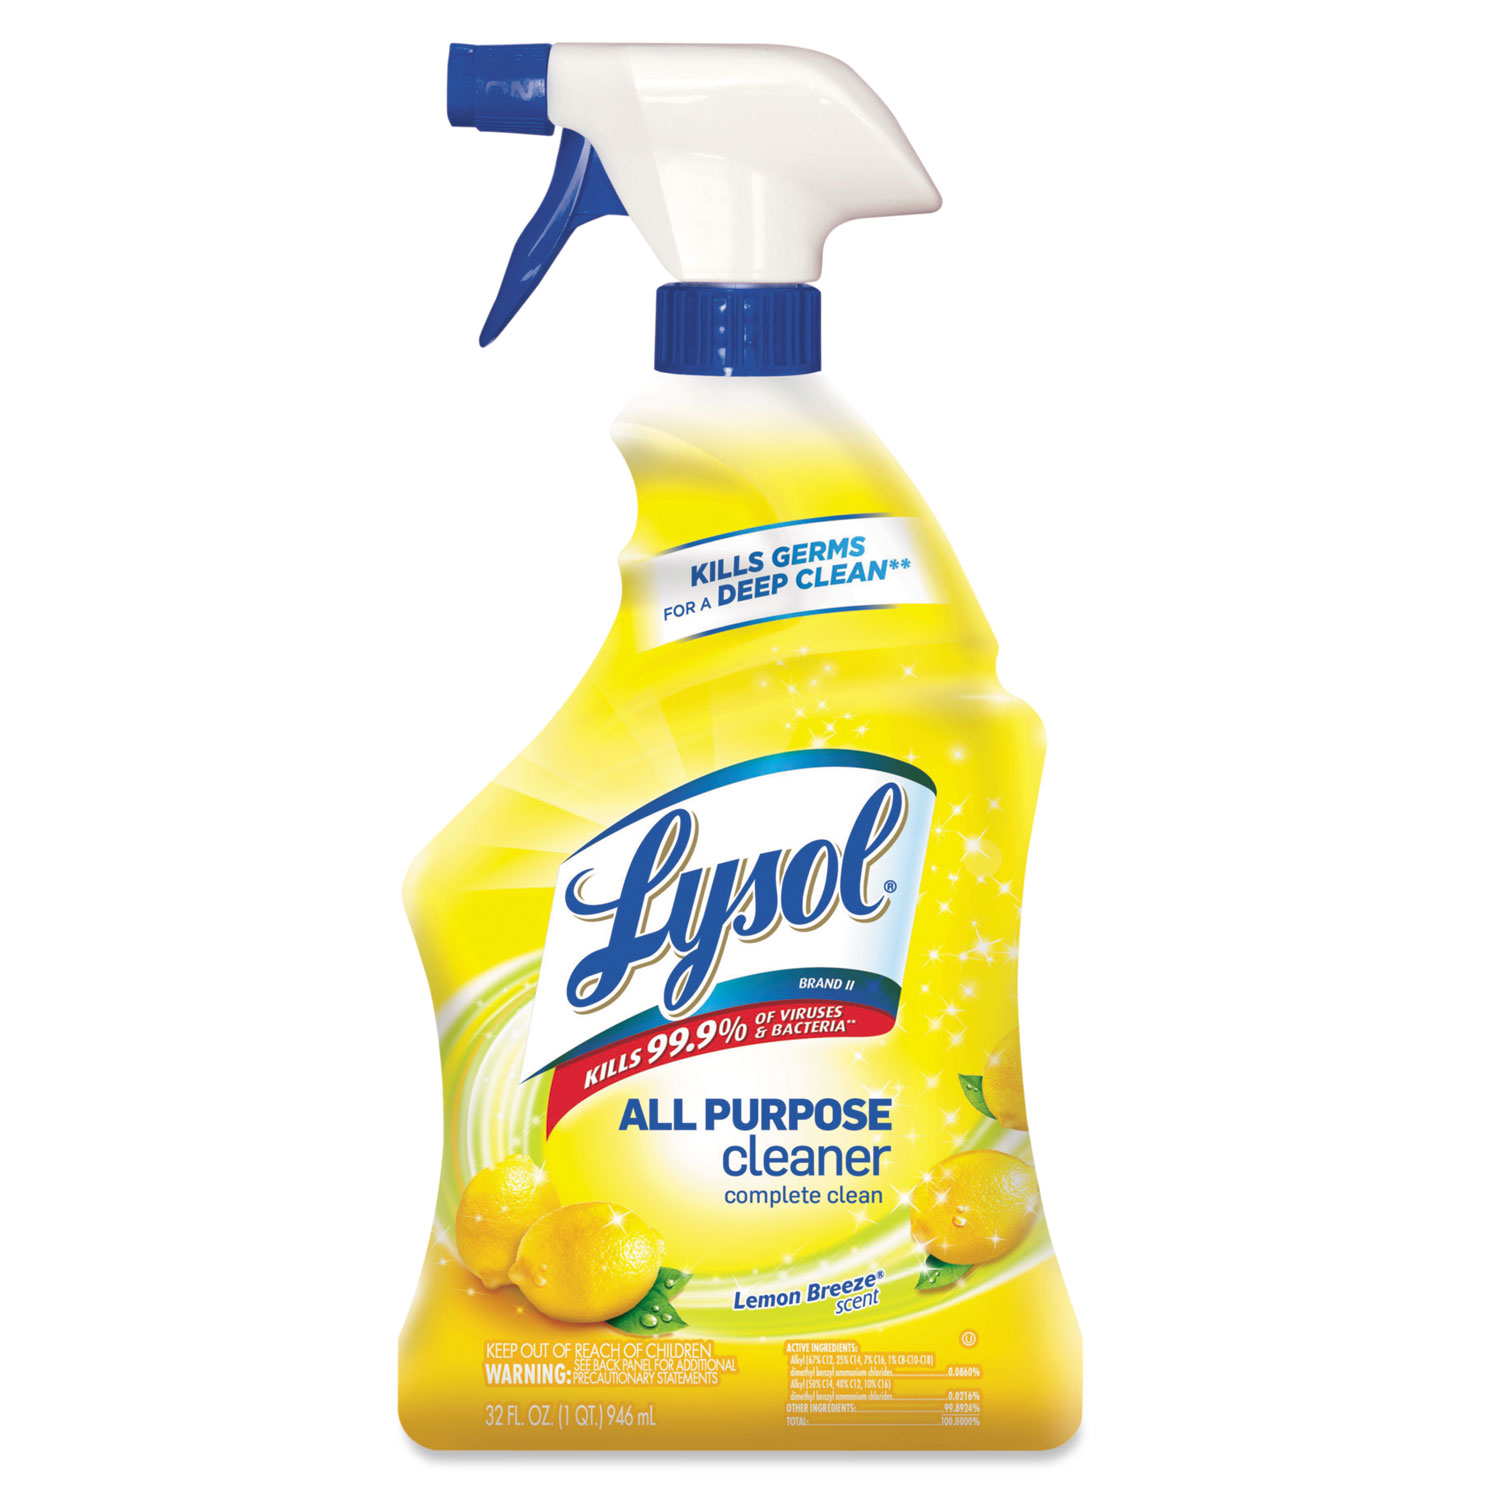 Ready-to-Use All-Purpose Cleaner, Lemon Breeze, 32oz Spray Bottle